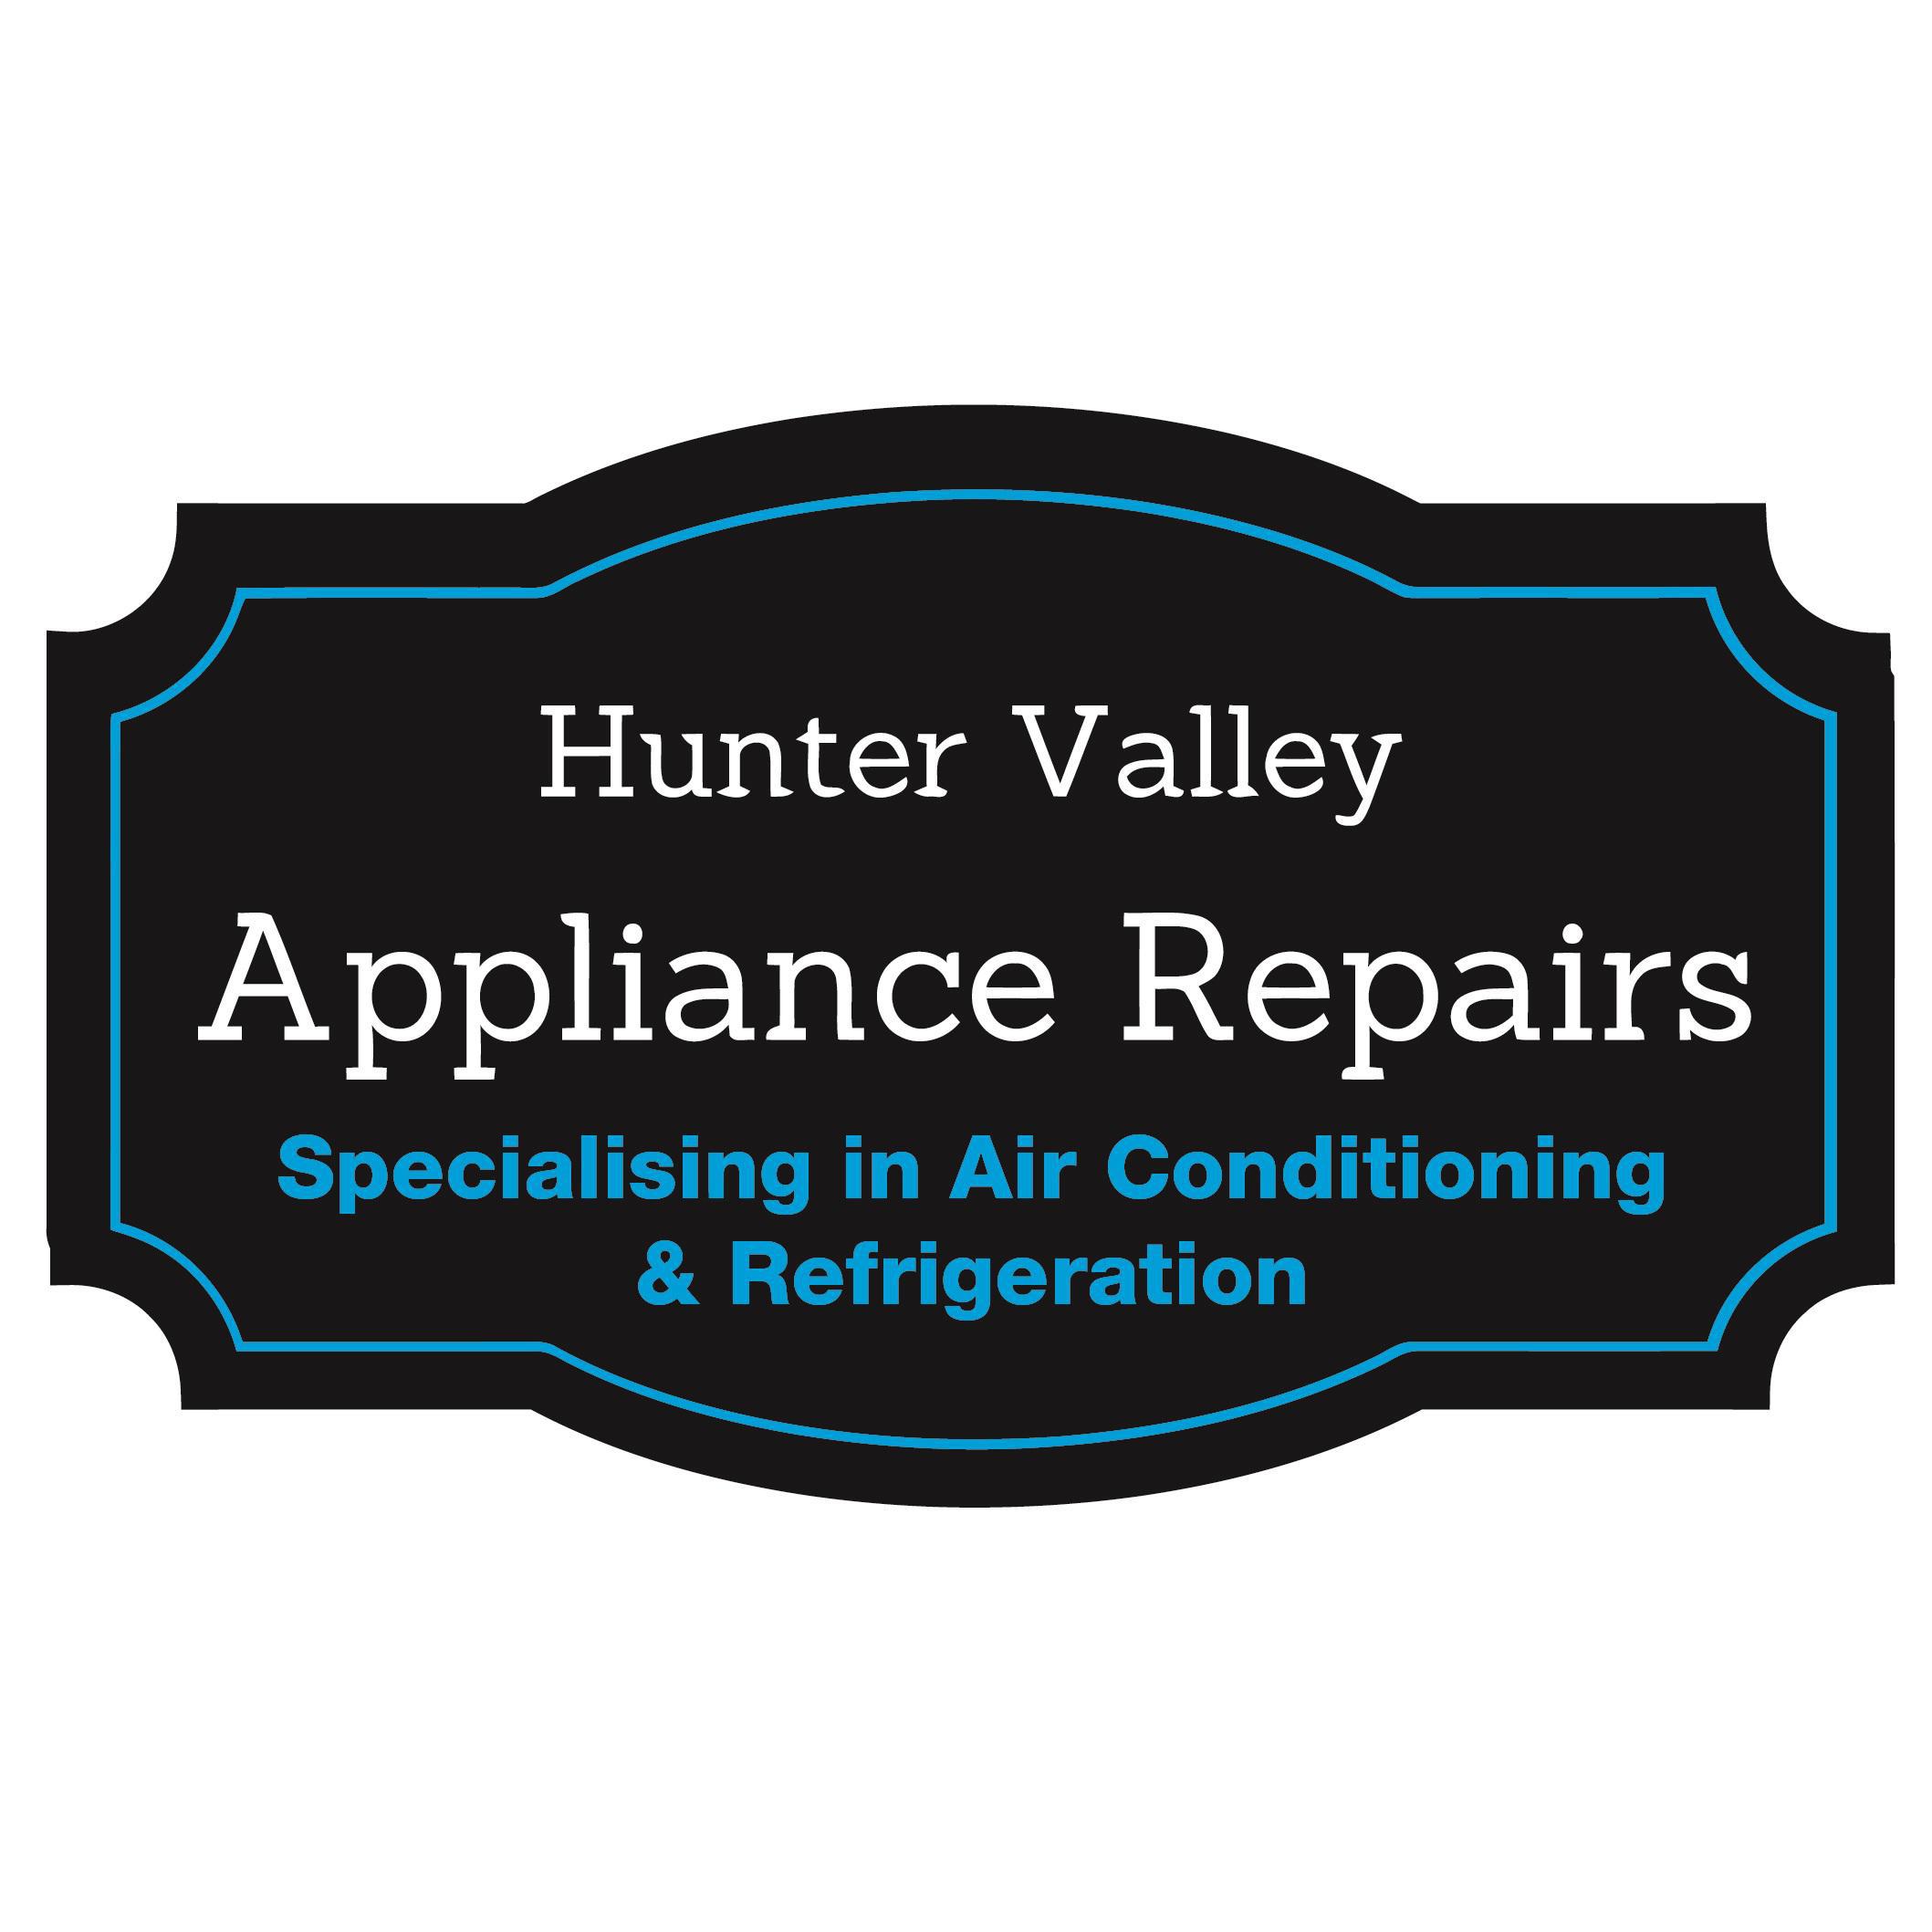 Hunter Valley Appliance Repairs - Muswellbrook, NSW - 0401 720 340 | ShowMeLocal.com